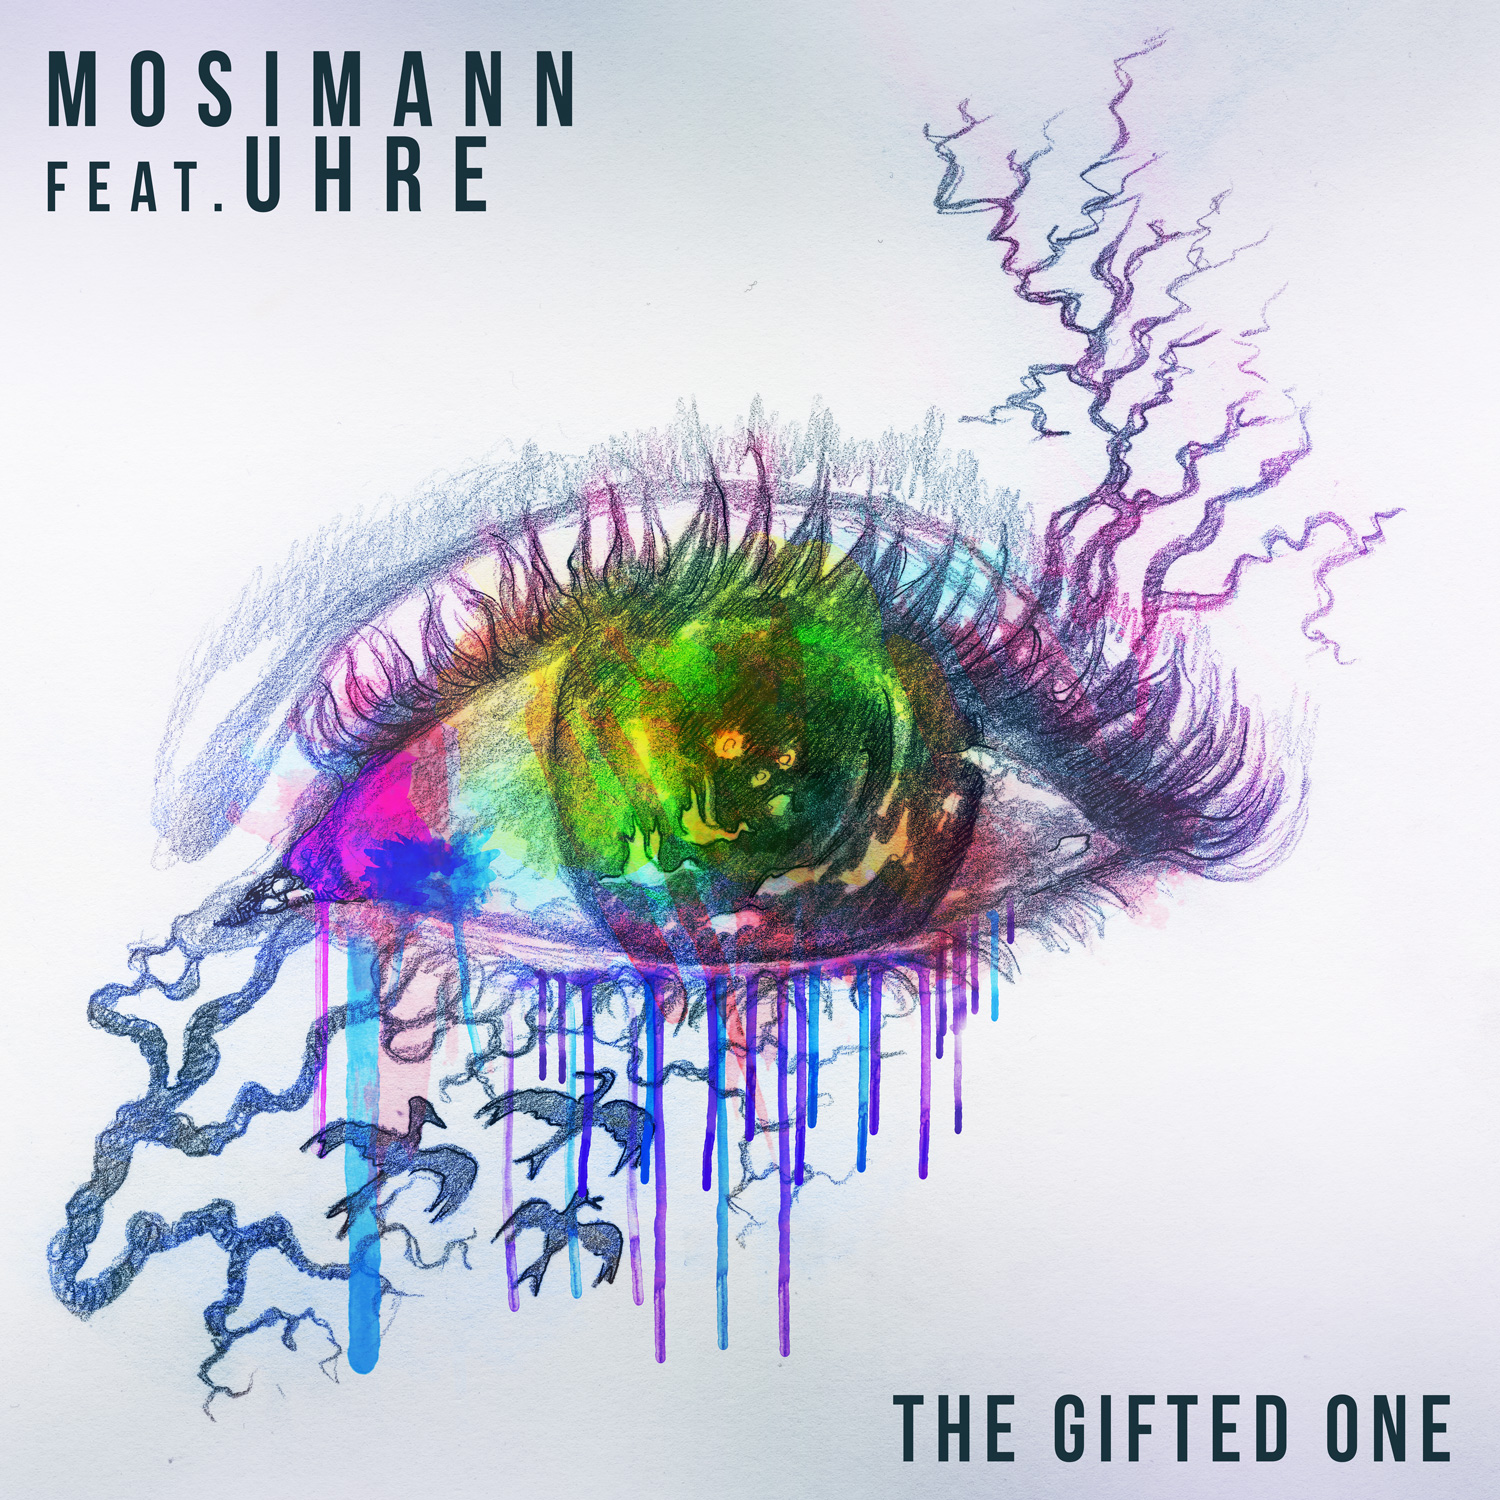 France’s Mosimann Proves He’s ‘The Gifted One’ With This Trippy Lyric Video